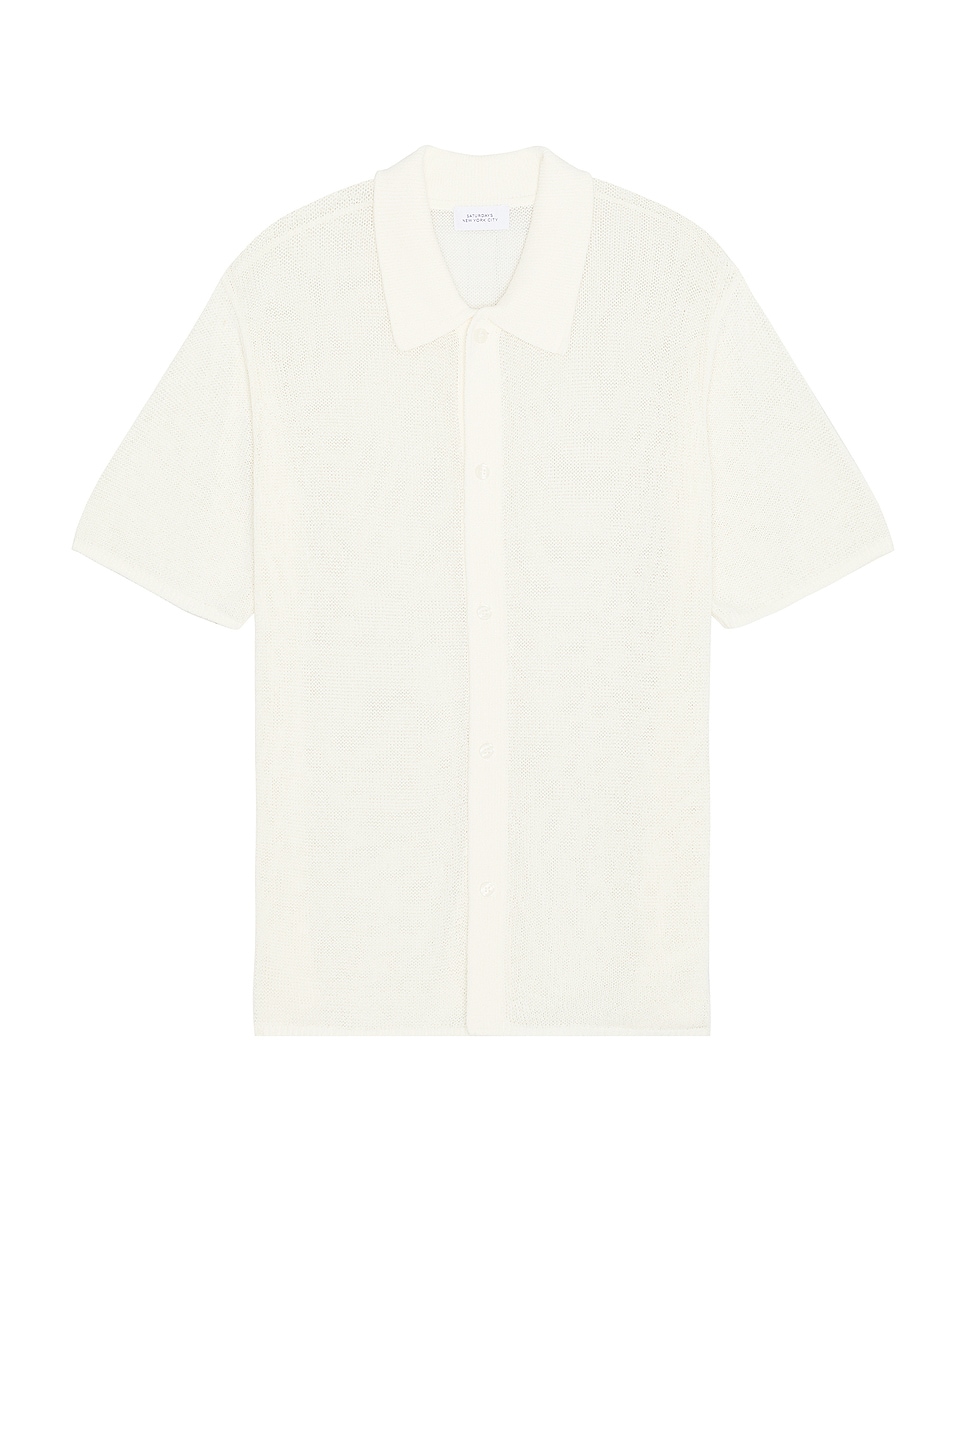 Image 1 of SATURDAYS NYC Kenneth Mesh Knit Shirt in Antique White